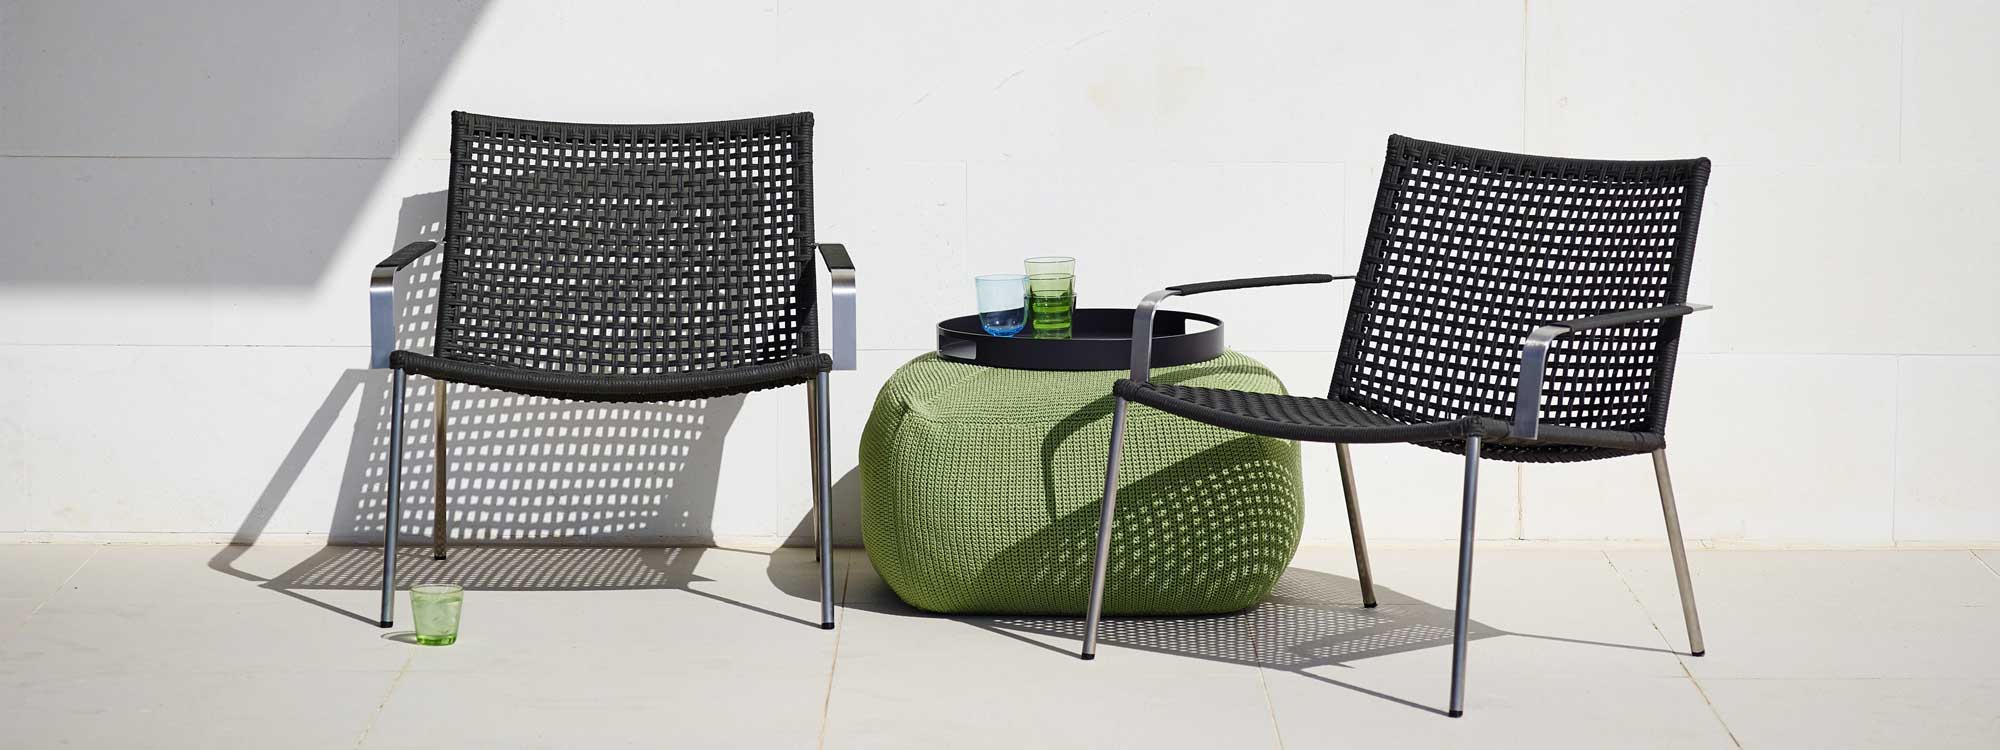 Image of two Straw stainless steel easy chairs and olive-colored Divine foot knotted pouf by Caneline